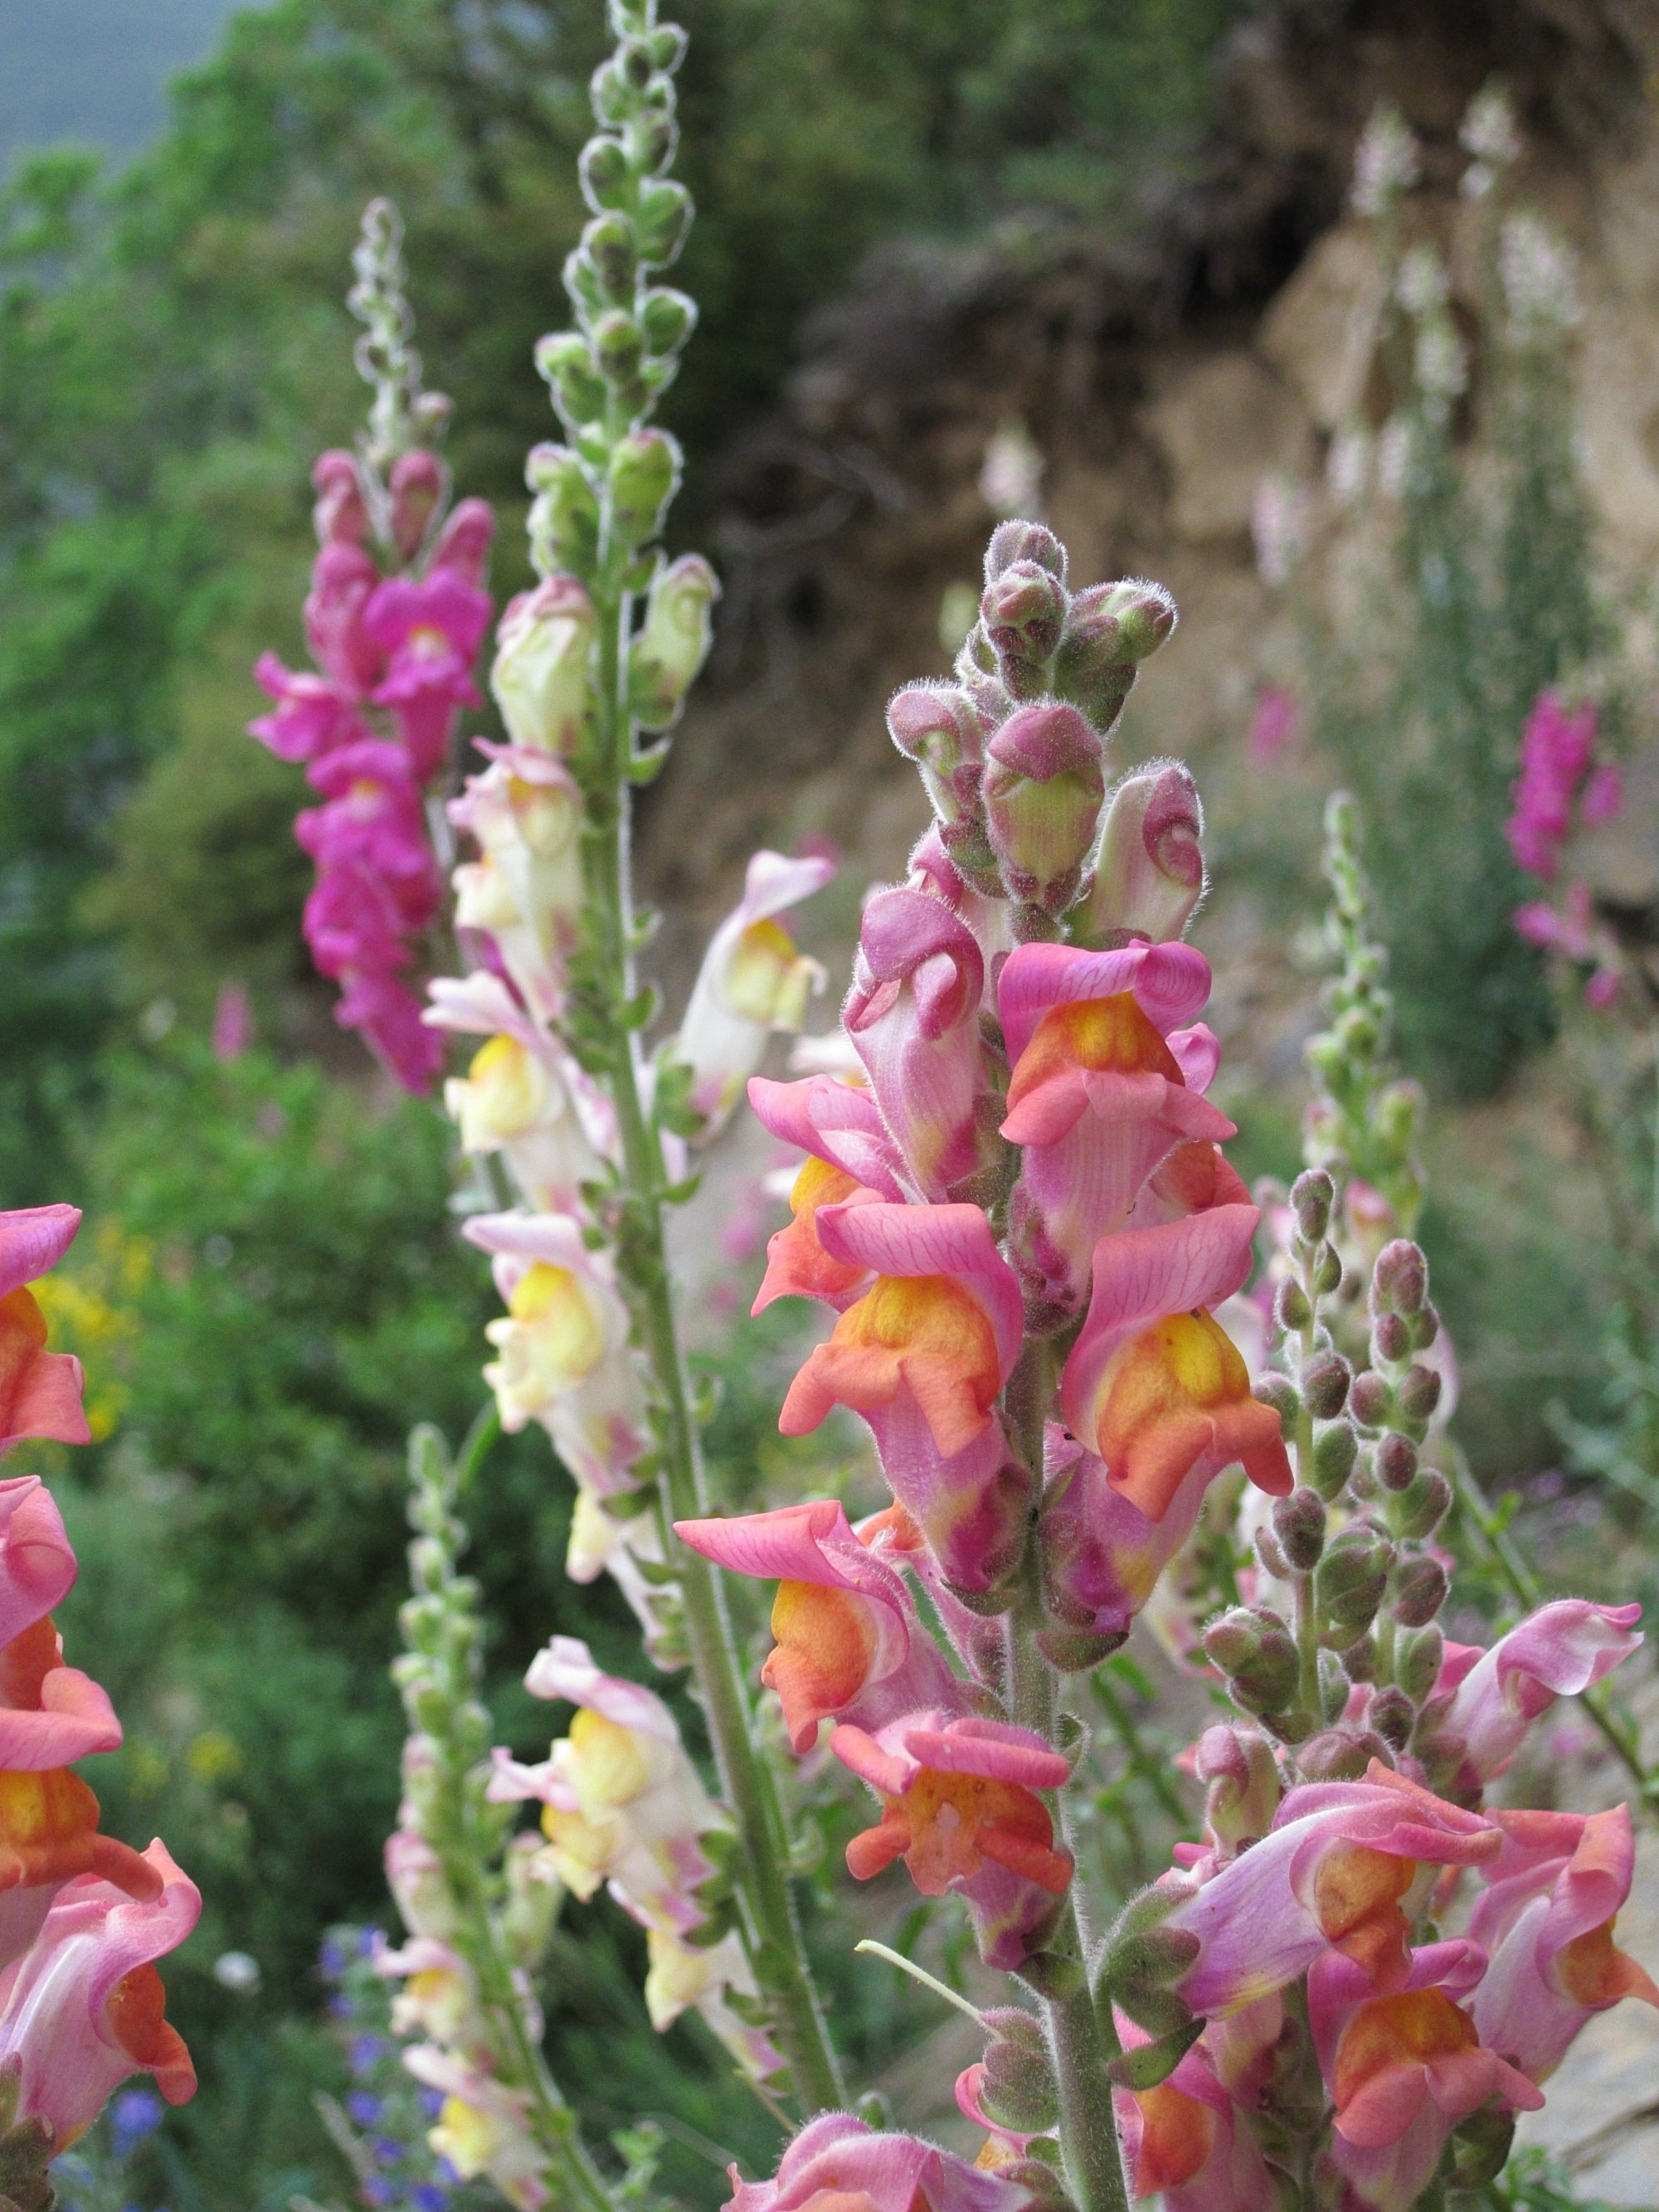 Genes Responsible For Difference In Flower Color Of Snapdragons Identified